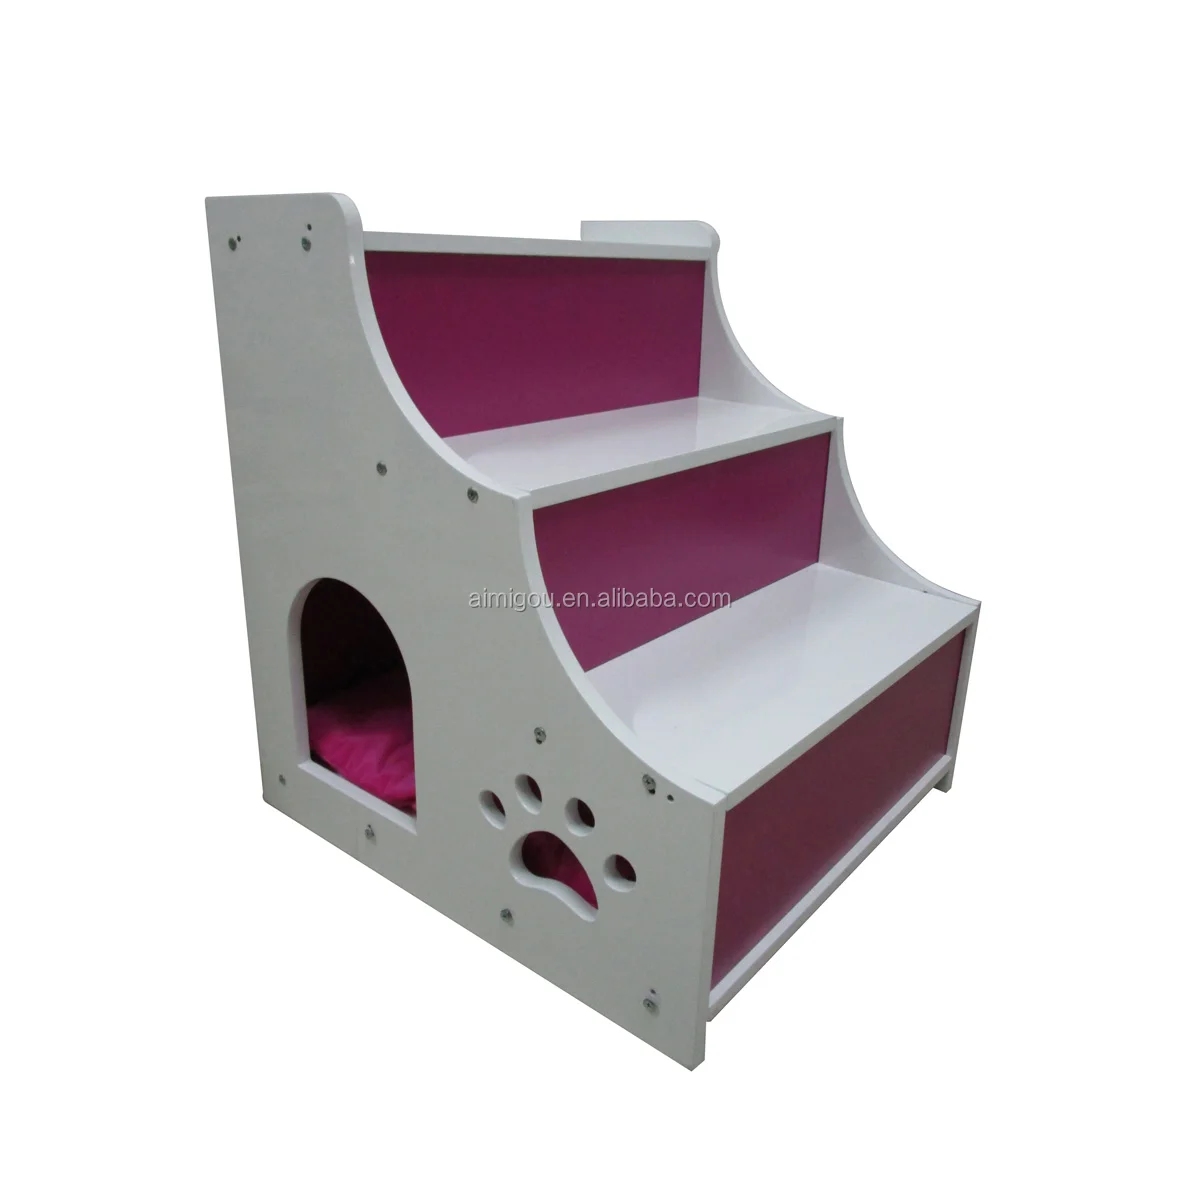 Cat Dog Bed Step Ladder 3 Layer For Pets Stairs Buy Dog Stair Cat